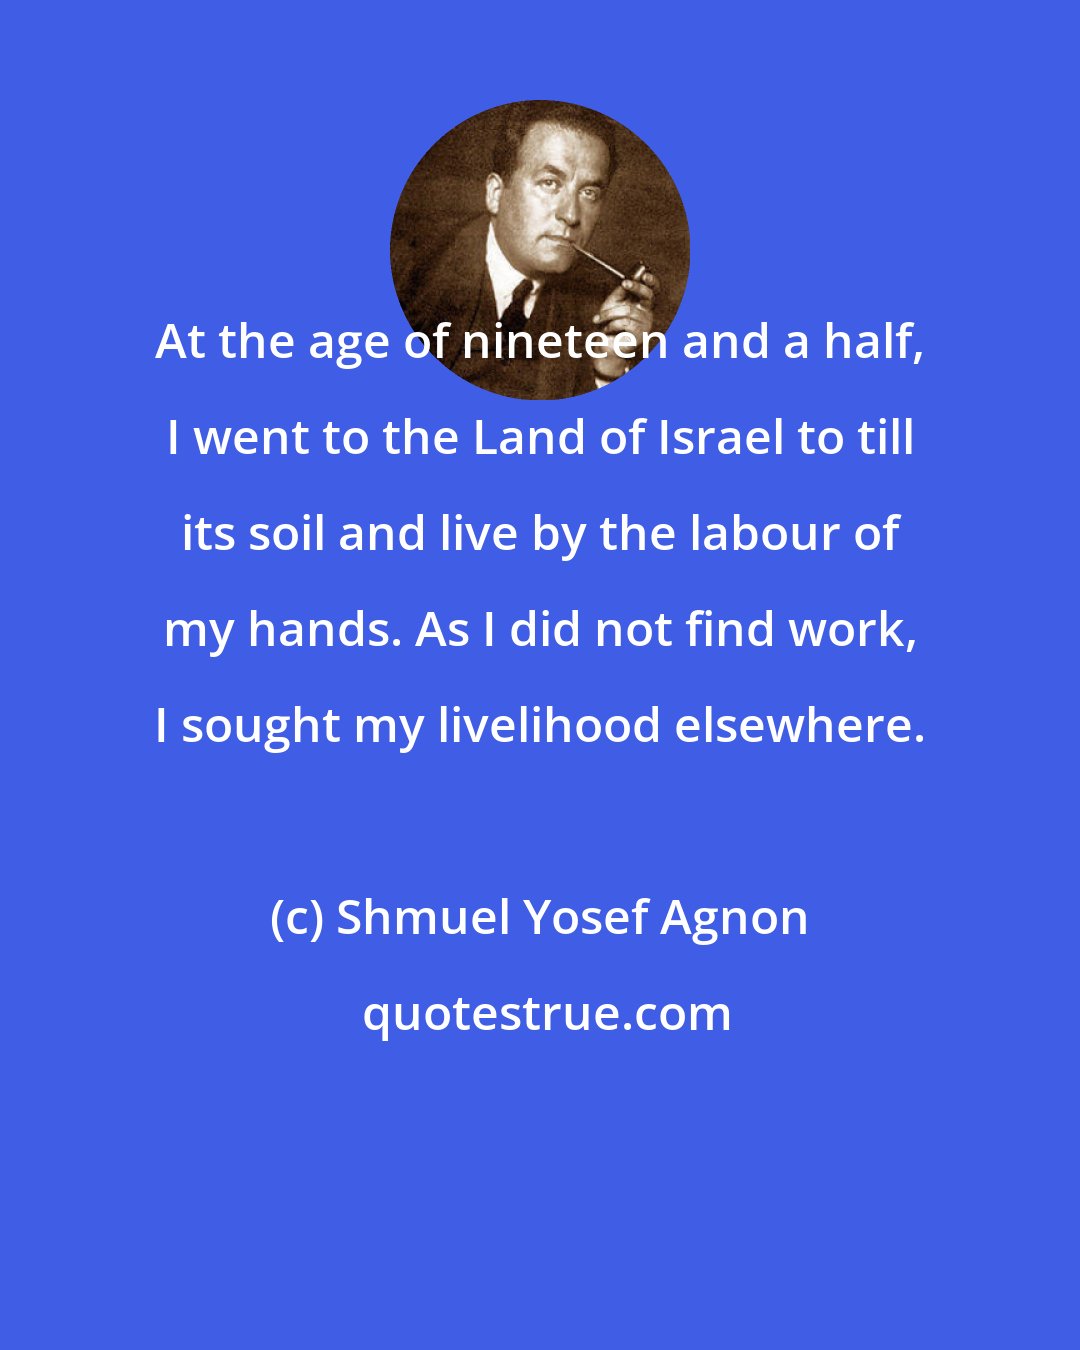 Shmuel Yosef Agnon: At the age of nineteen and a half, I went to the Land of Israel to till its soil and live by the labour of my hands. As I did not find work, I sought my livelihood elsewhere.